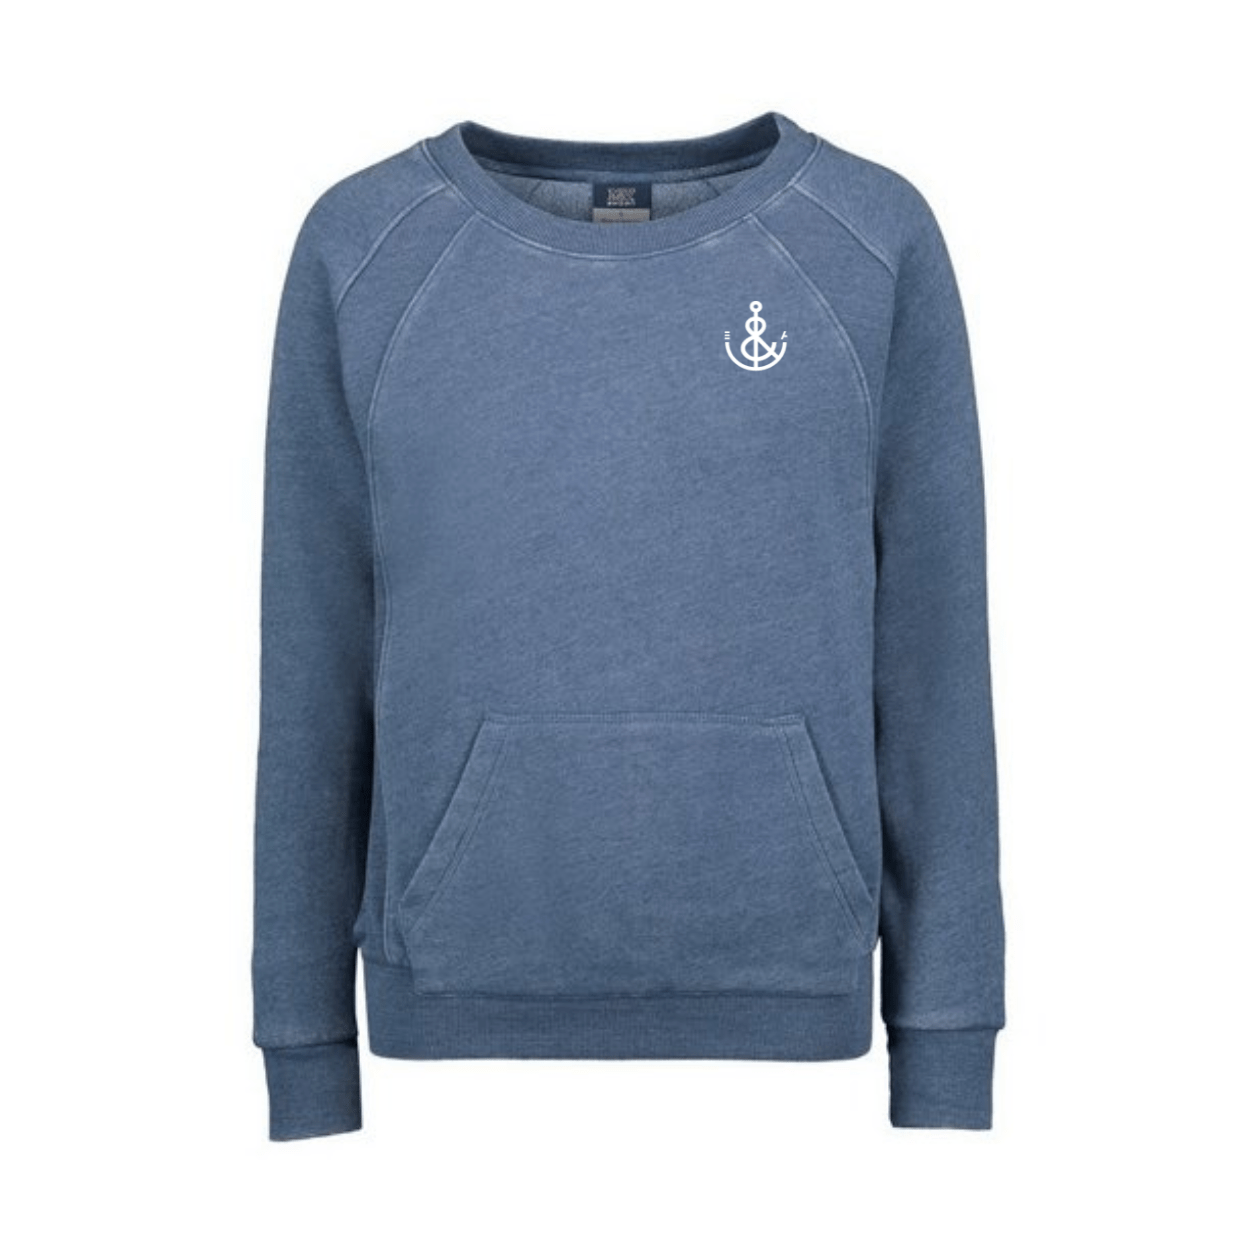 Embroidered Anchor Crewneck with Pocket - Heathered Blue